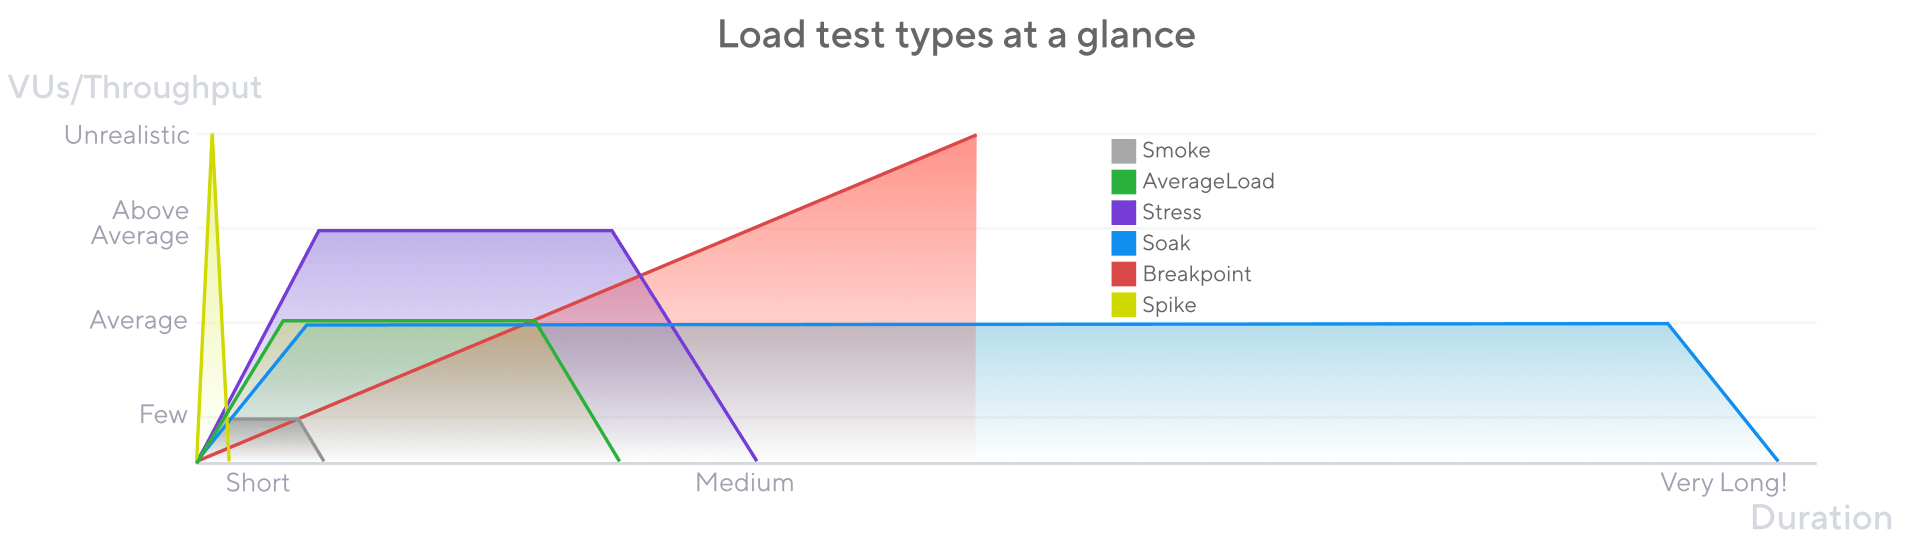 Diagram showing the different load testing types and load volumes and duration